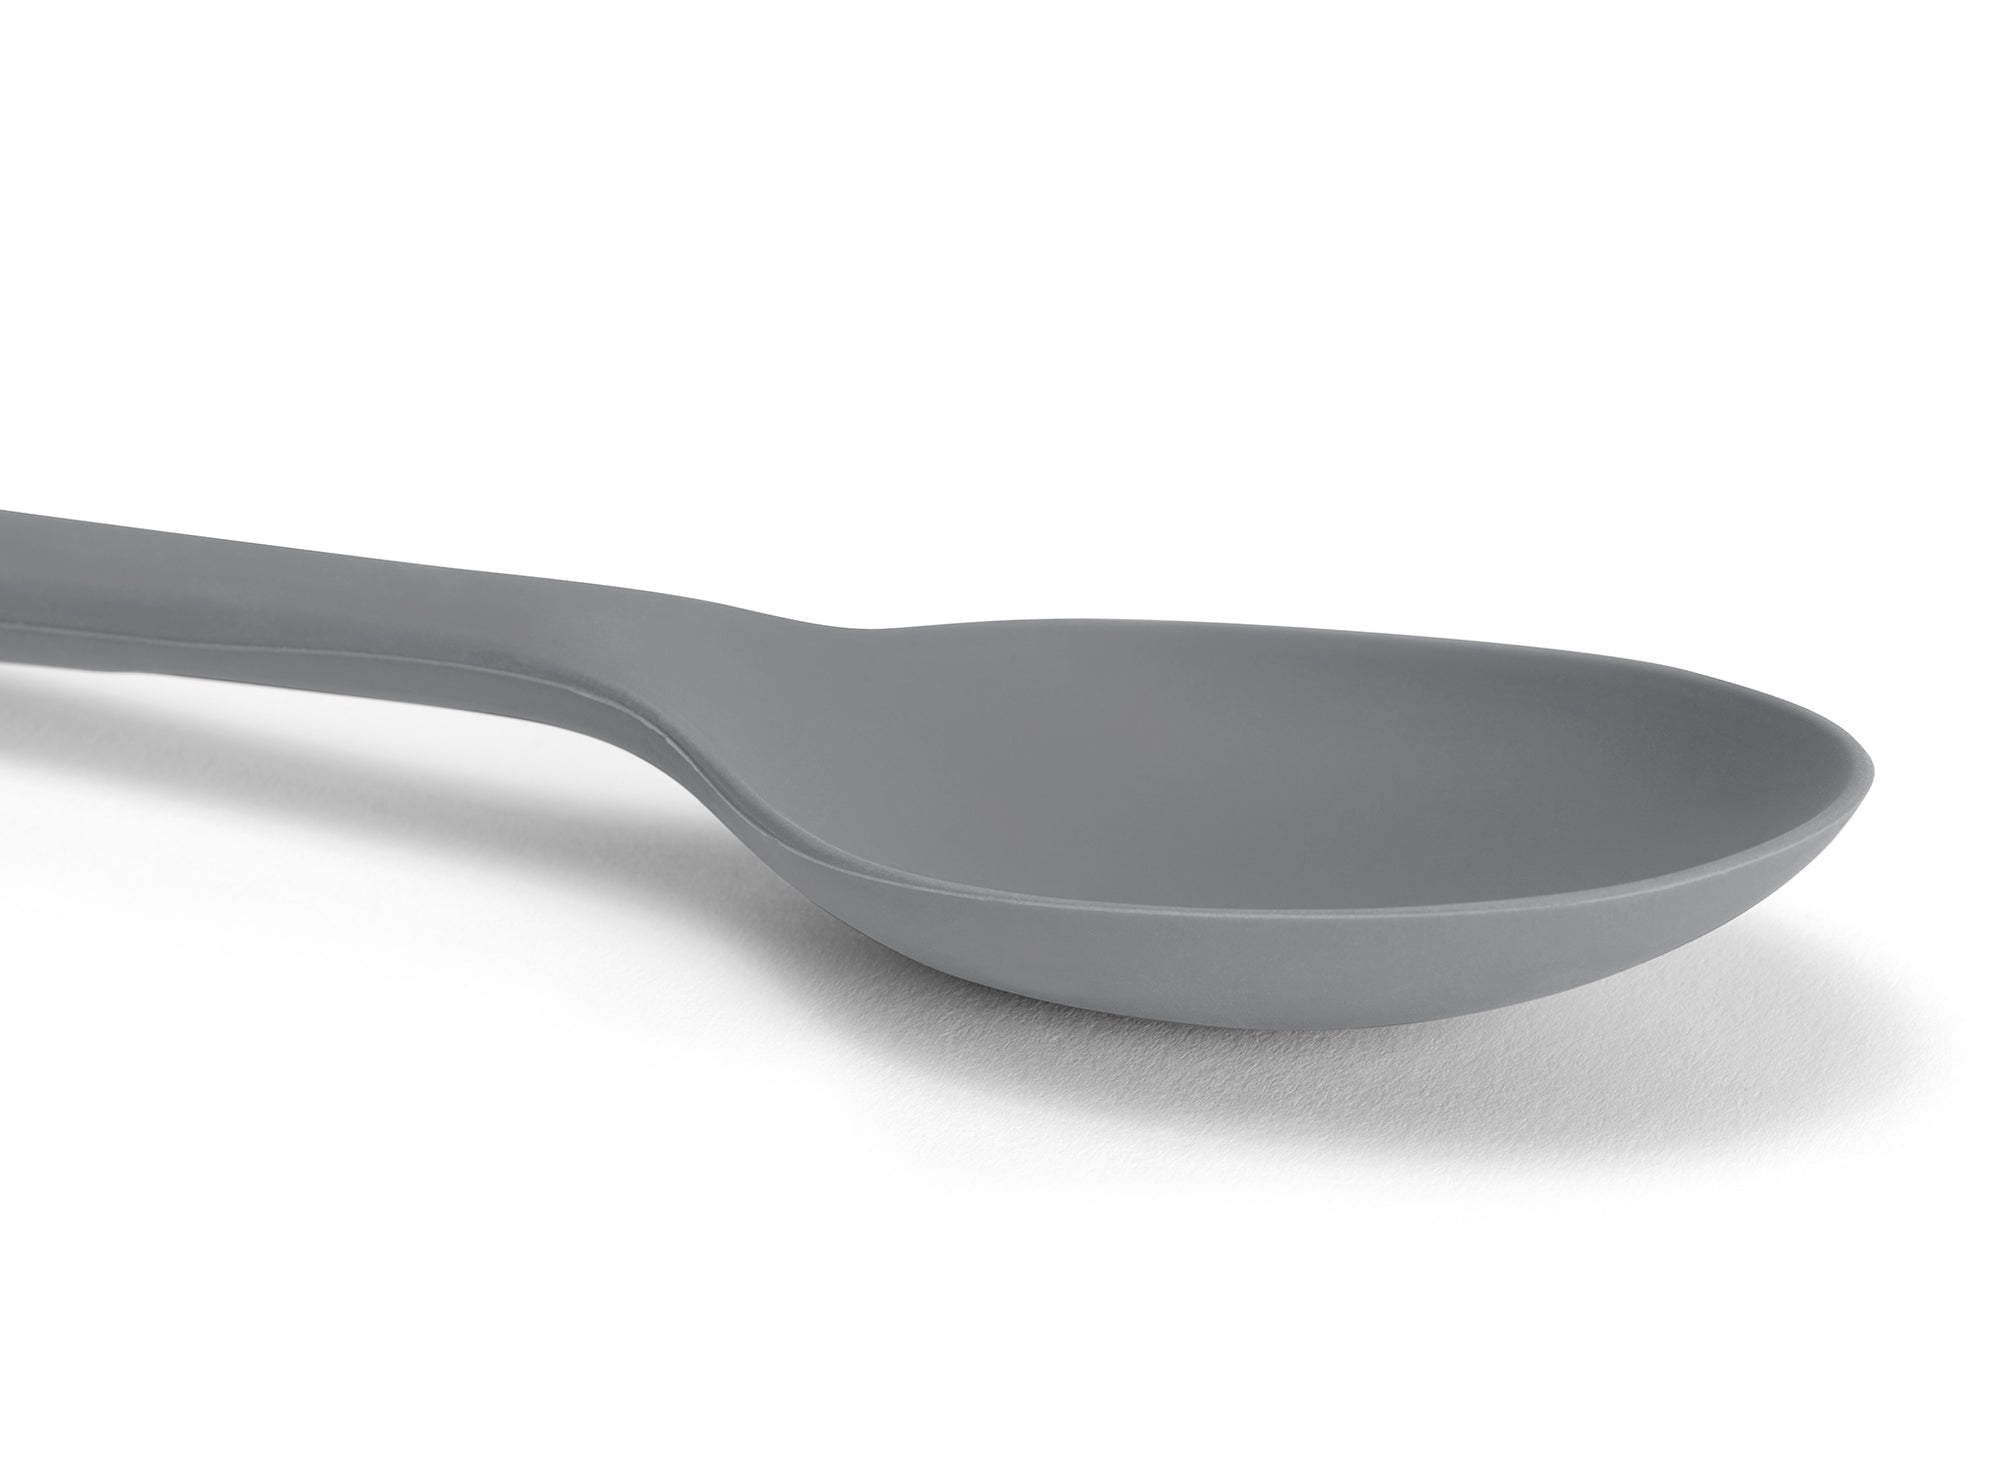 A Grey Misen Mixing Spoon seen from above on a white background.